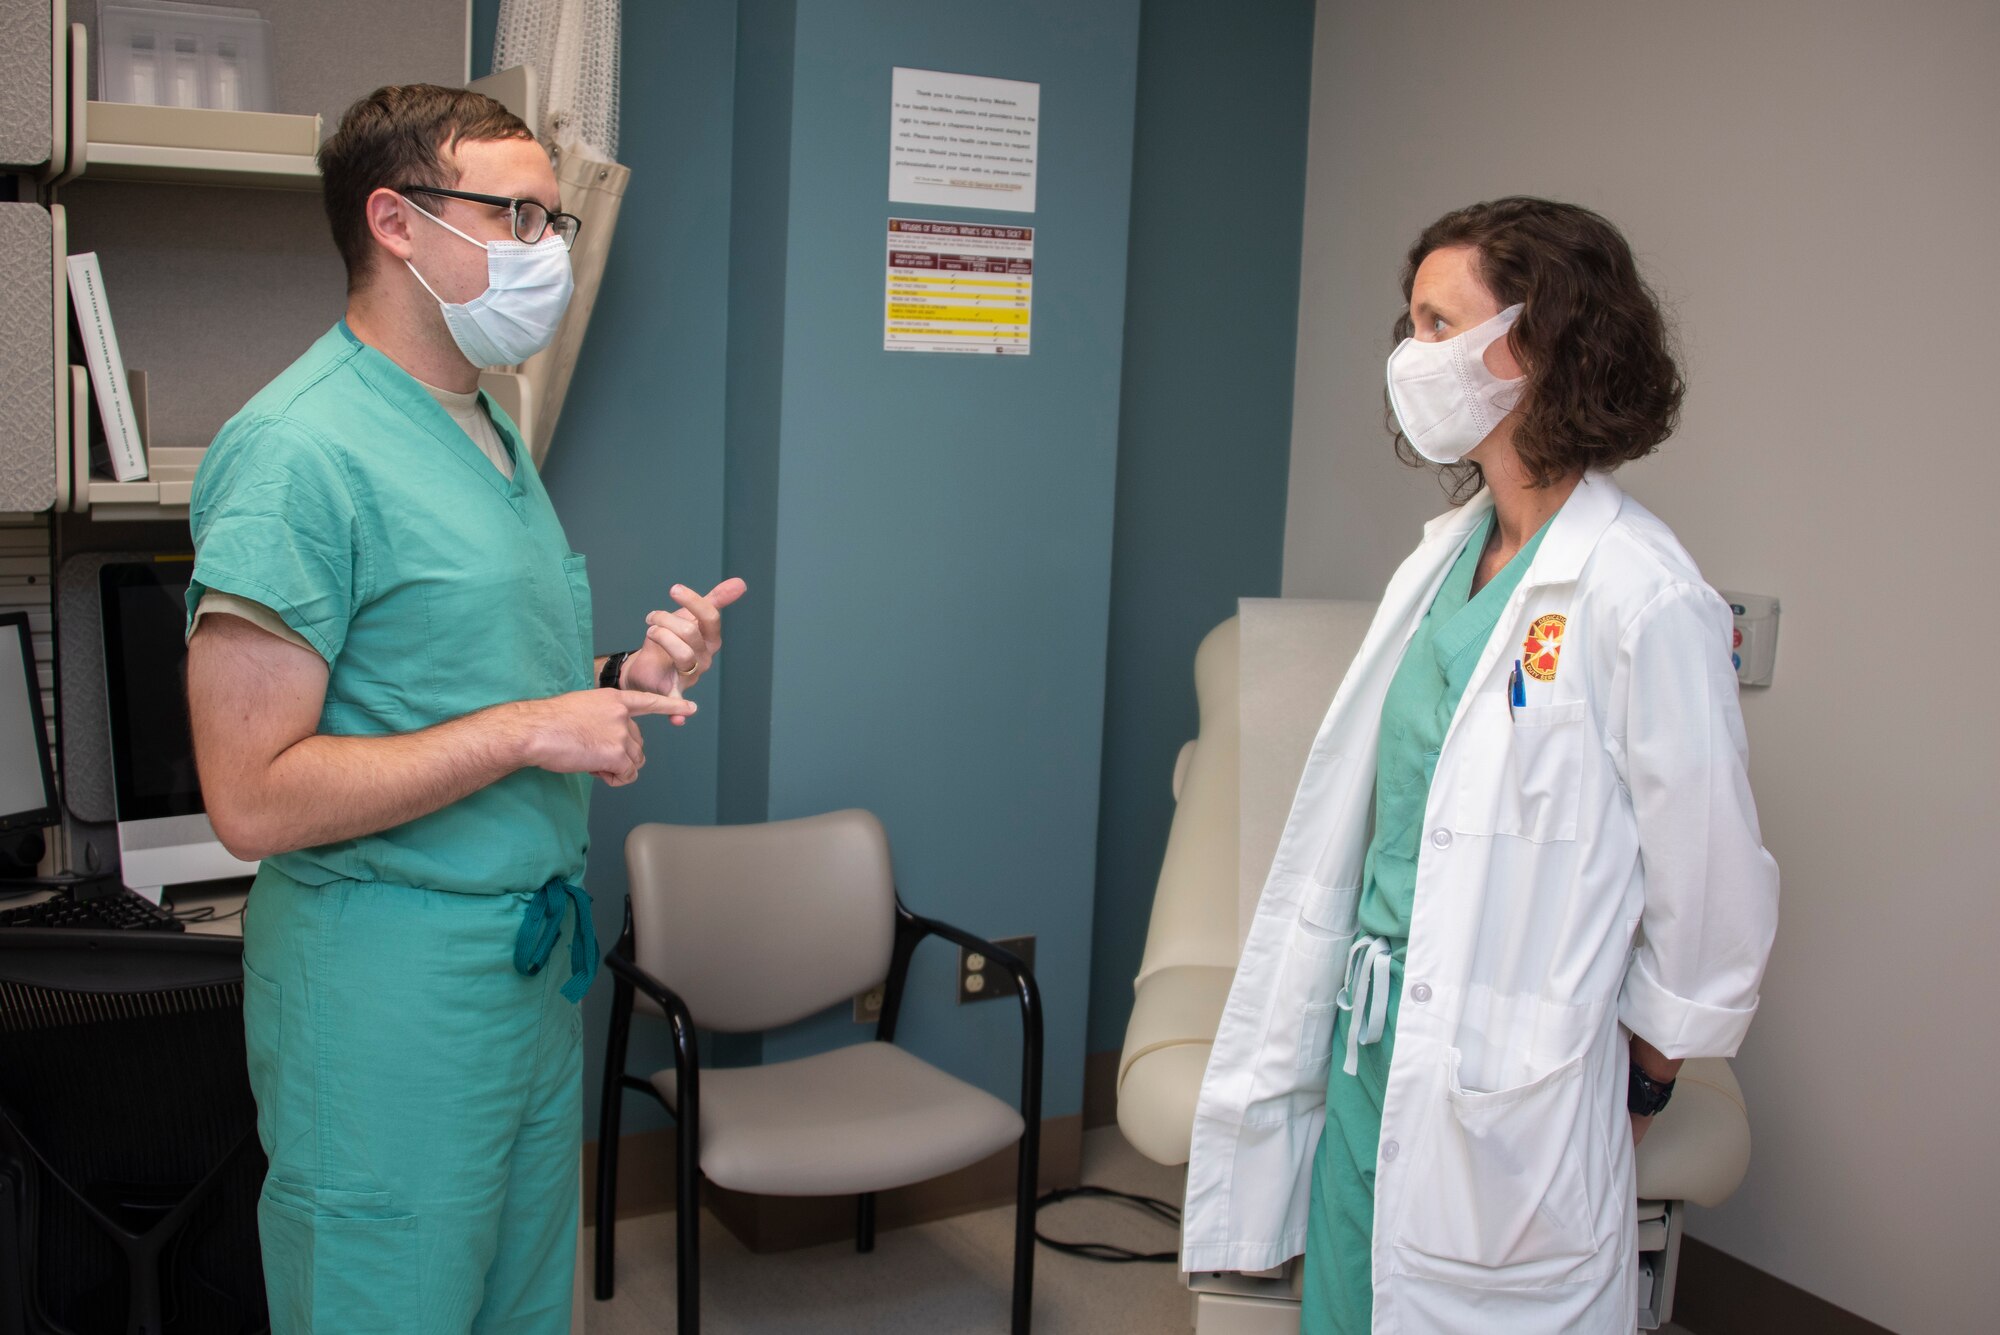 Image of U.S. Air Force Col. (Dr.) Heather Yun, Deputy Commander for Medical Services, talking with U.S. Air Force Capt. Joseph Marcus, senior infectious disease fellow.